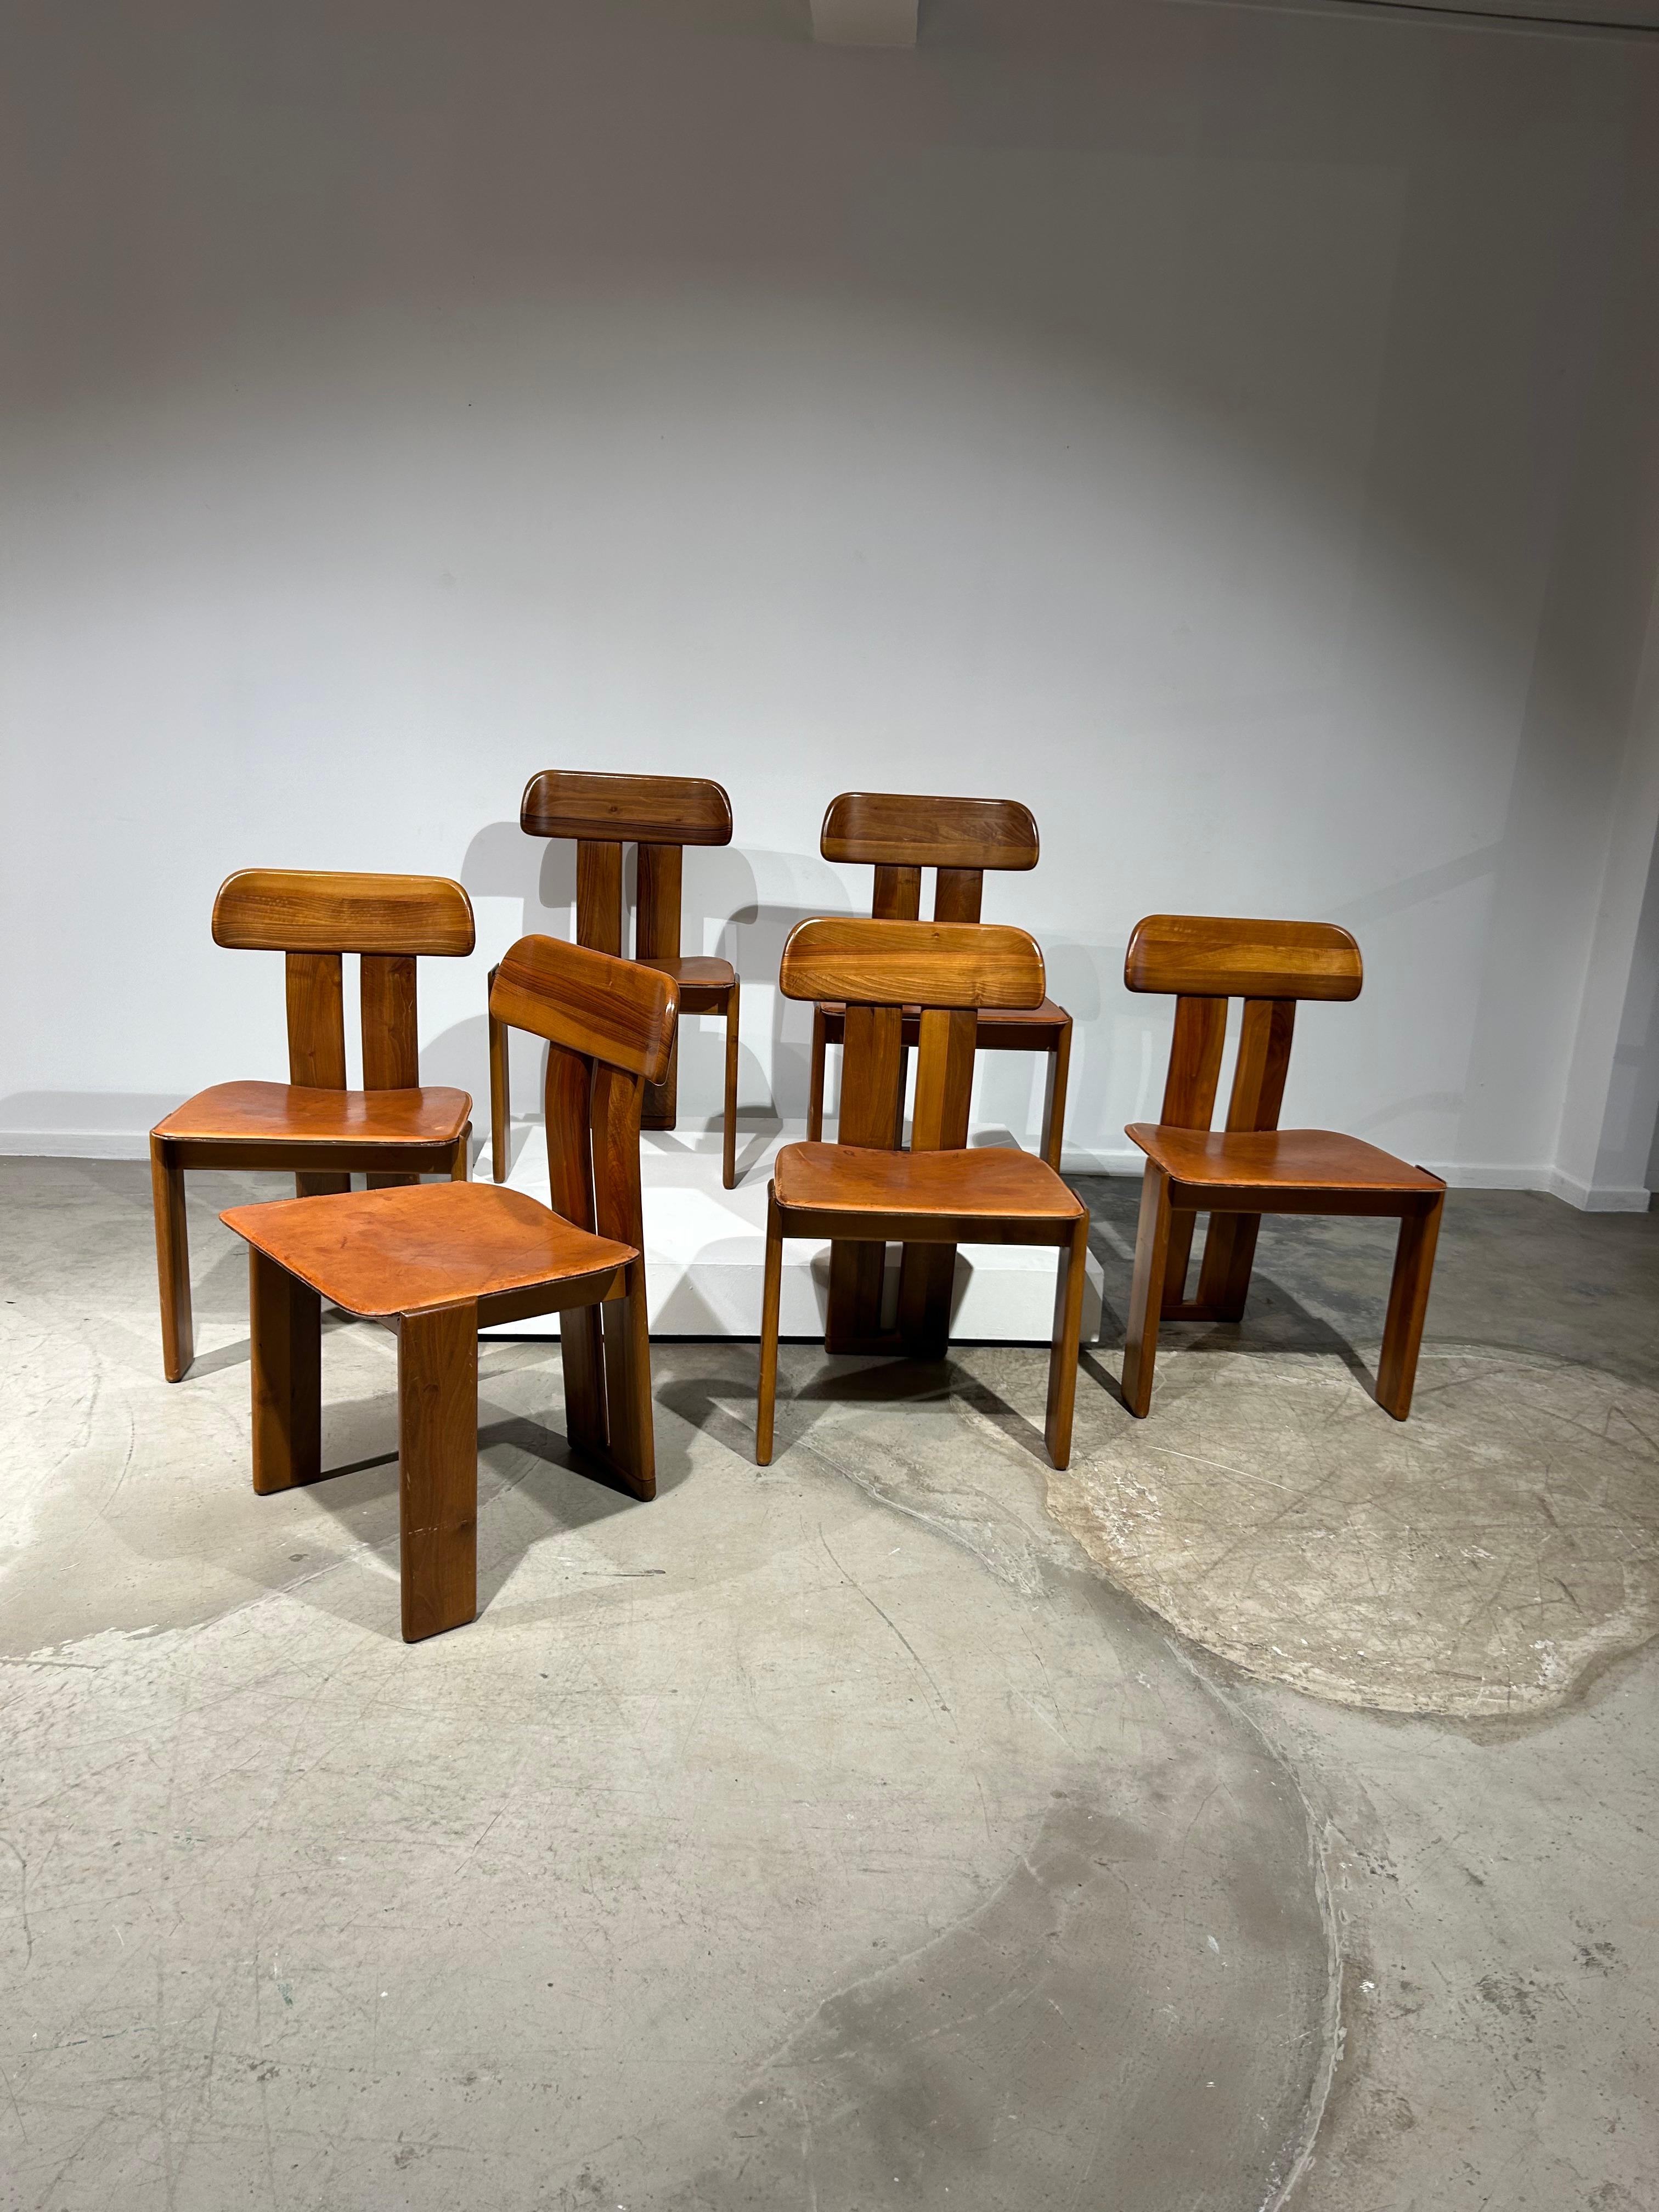 Mid-20th Century Set of 6 Sapporo chairs by Mario Marenco for Mobilgirgi